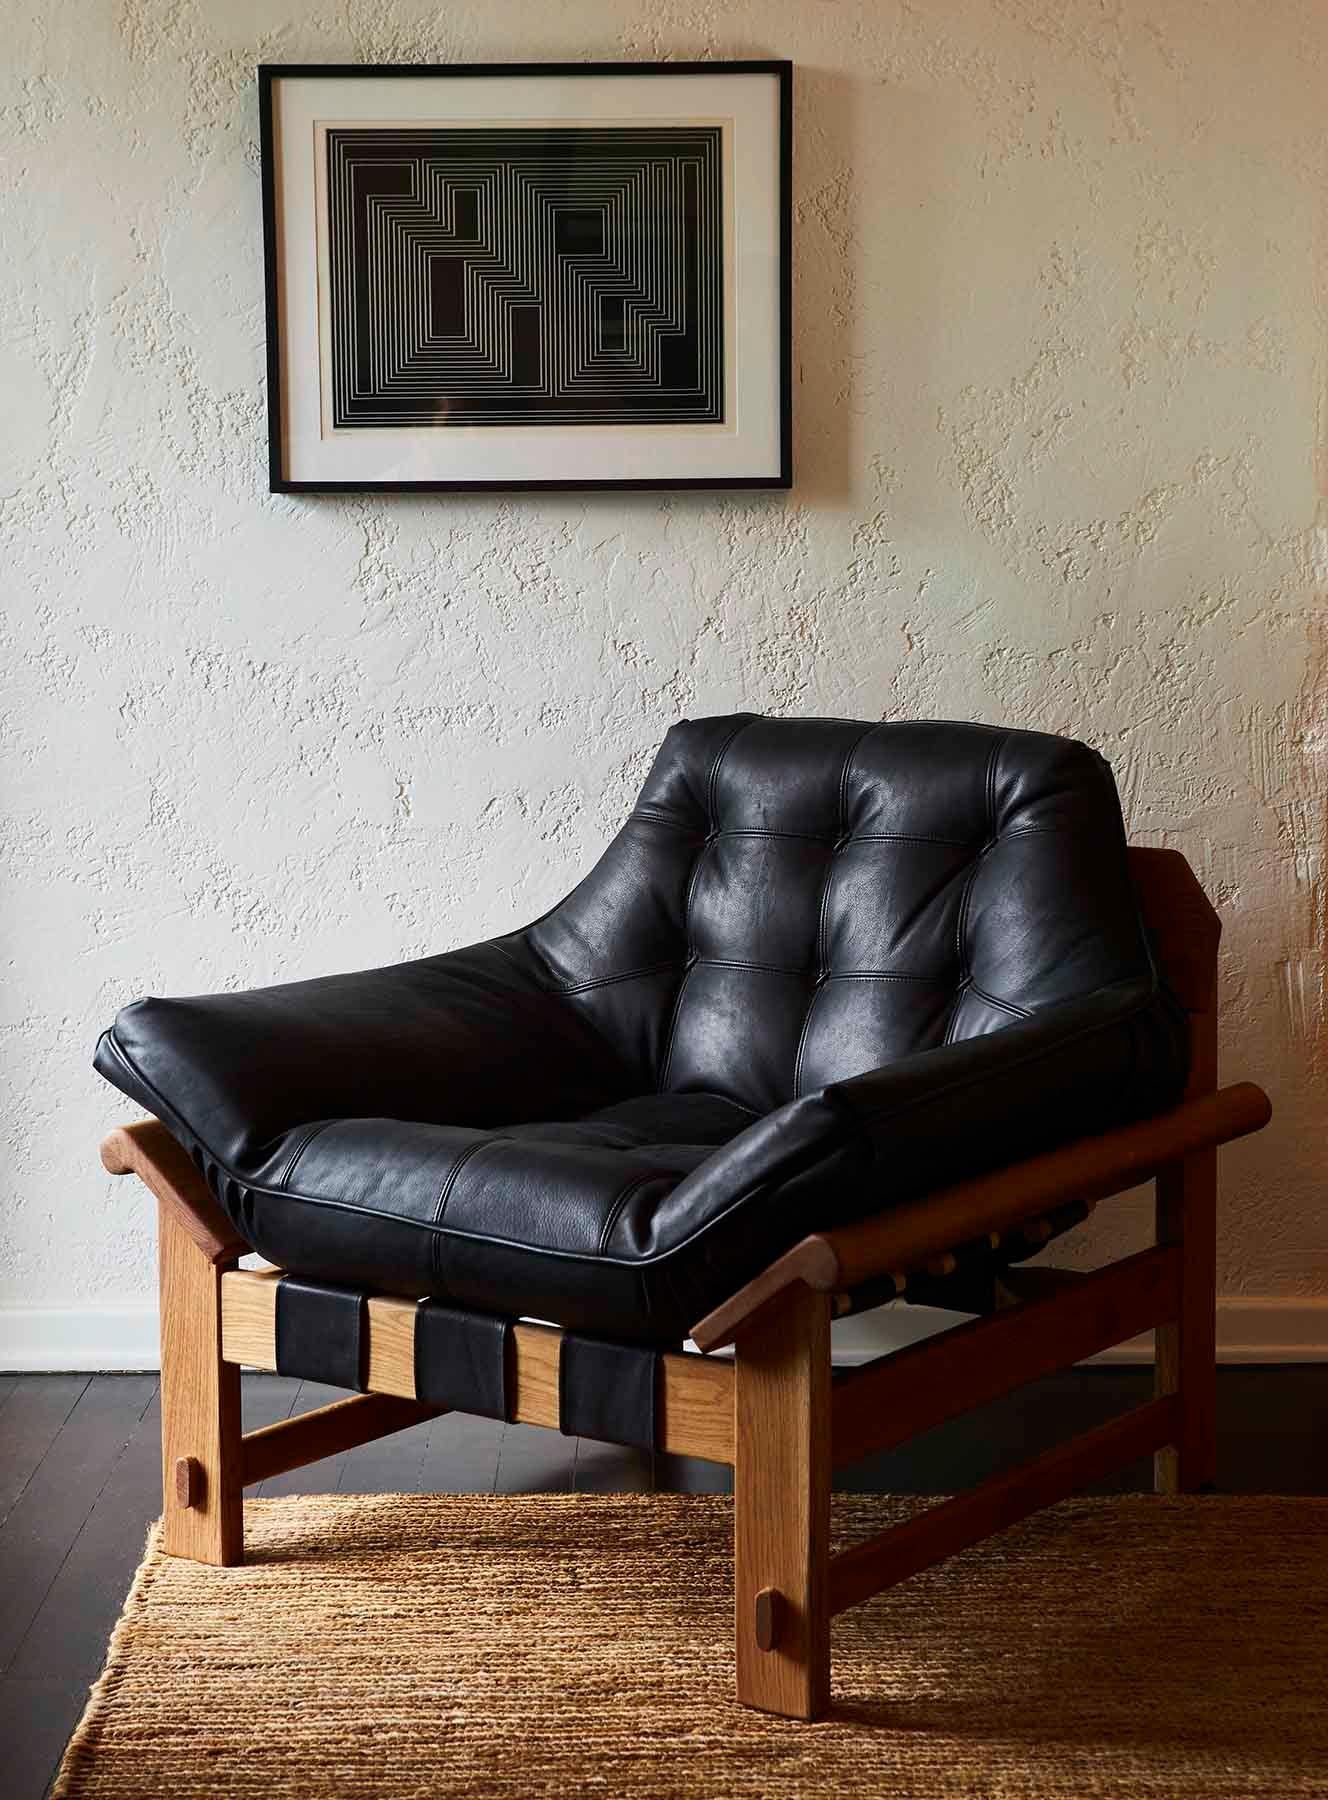 The Ojai lounge chair features a solid white oak or solid walnut base and a single tufted leather cushion with leather straps. 

The Lawson-Fenning Collection is designed and handmade in Los Angeles, California.
   